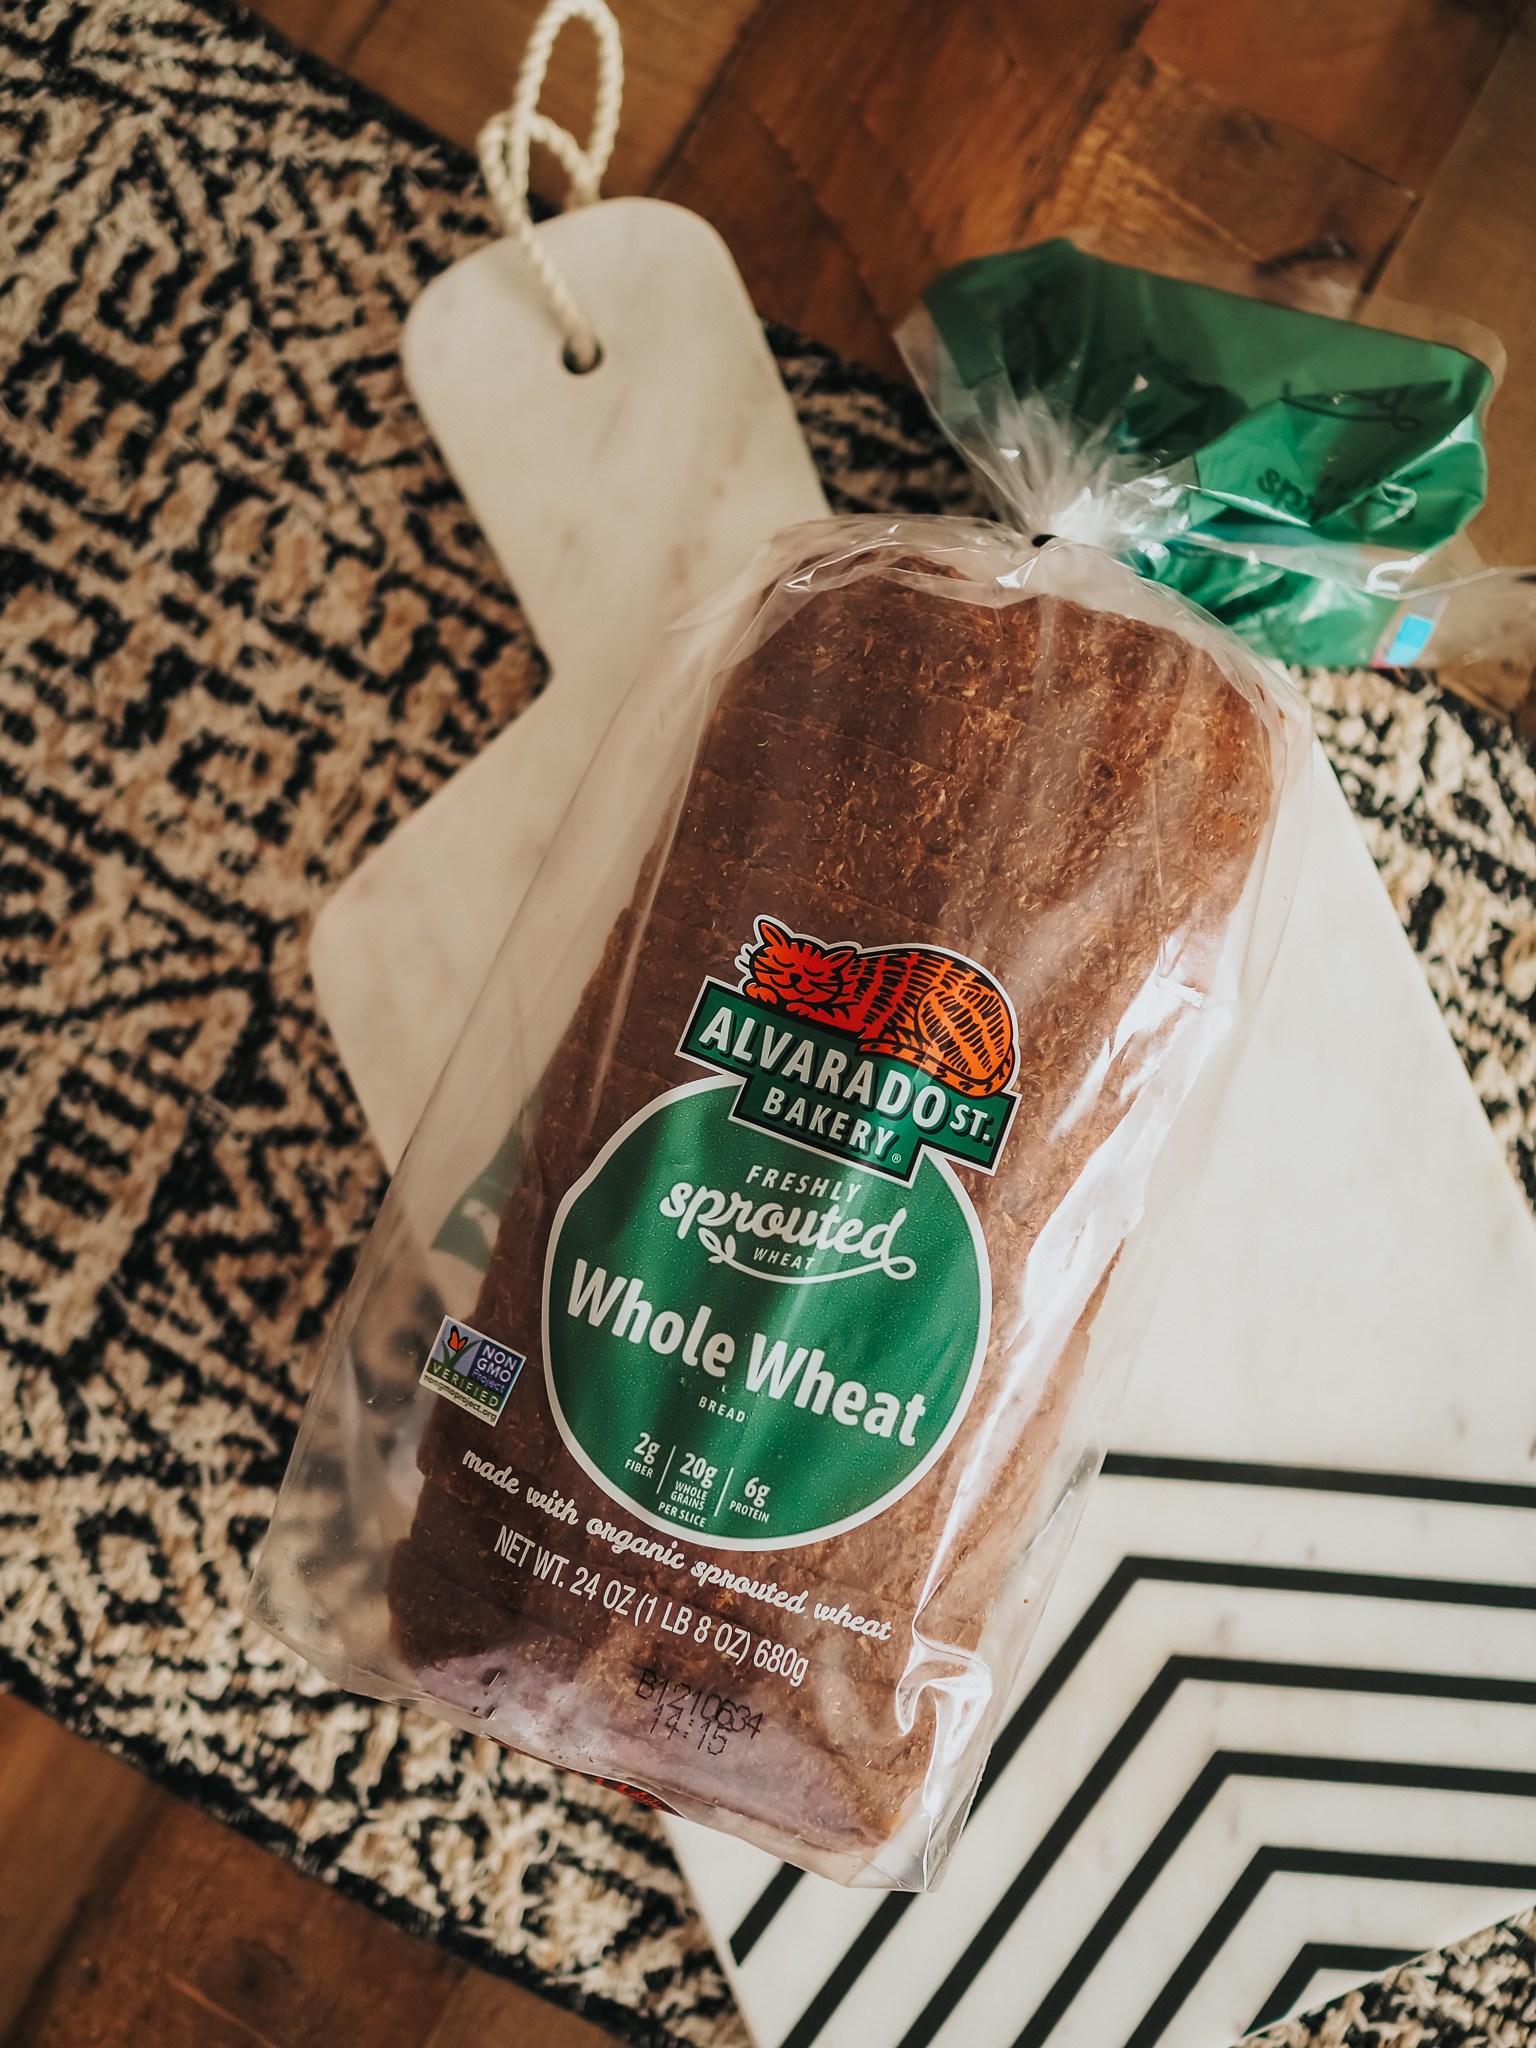 Don’t be fooled by misleading labels! This blog post covers the BEST vegan bread to buy (or make!). This vegan bread is healthy and delicious.